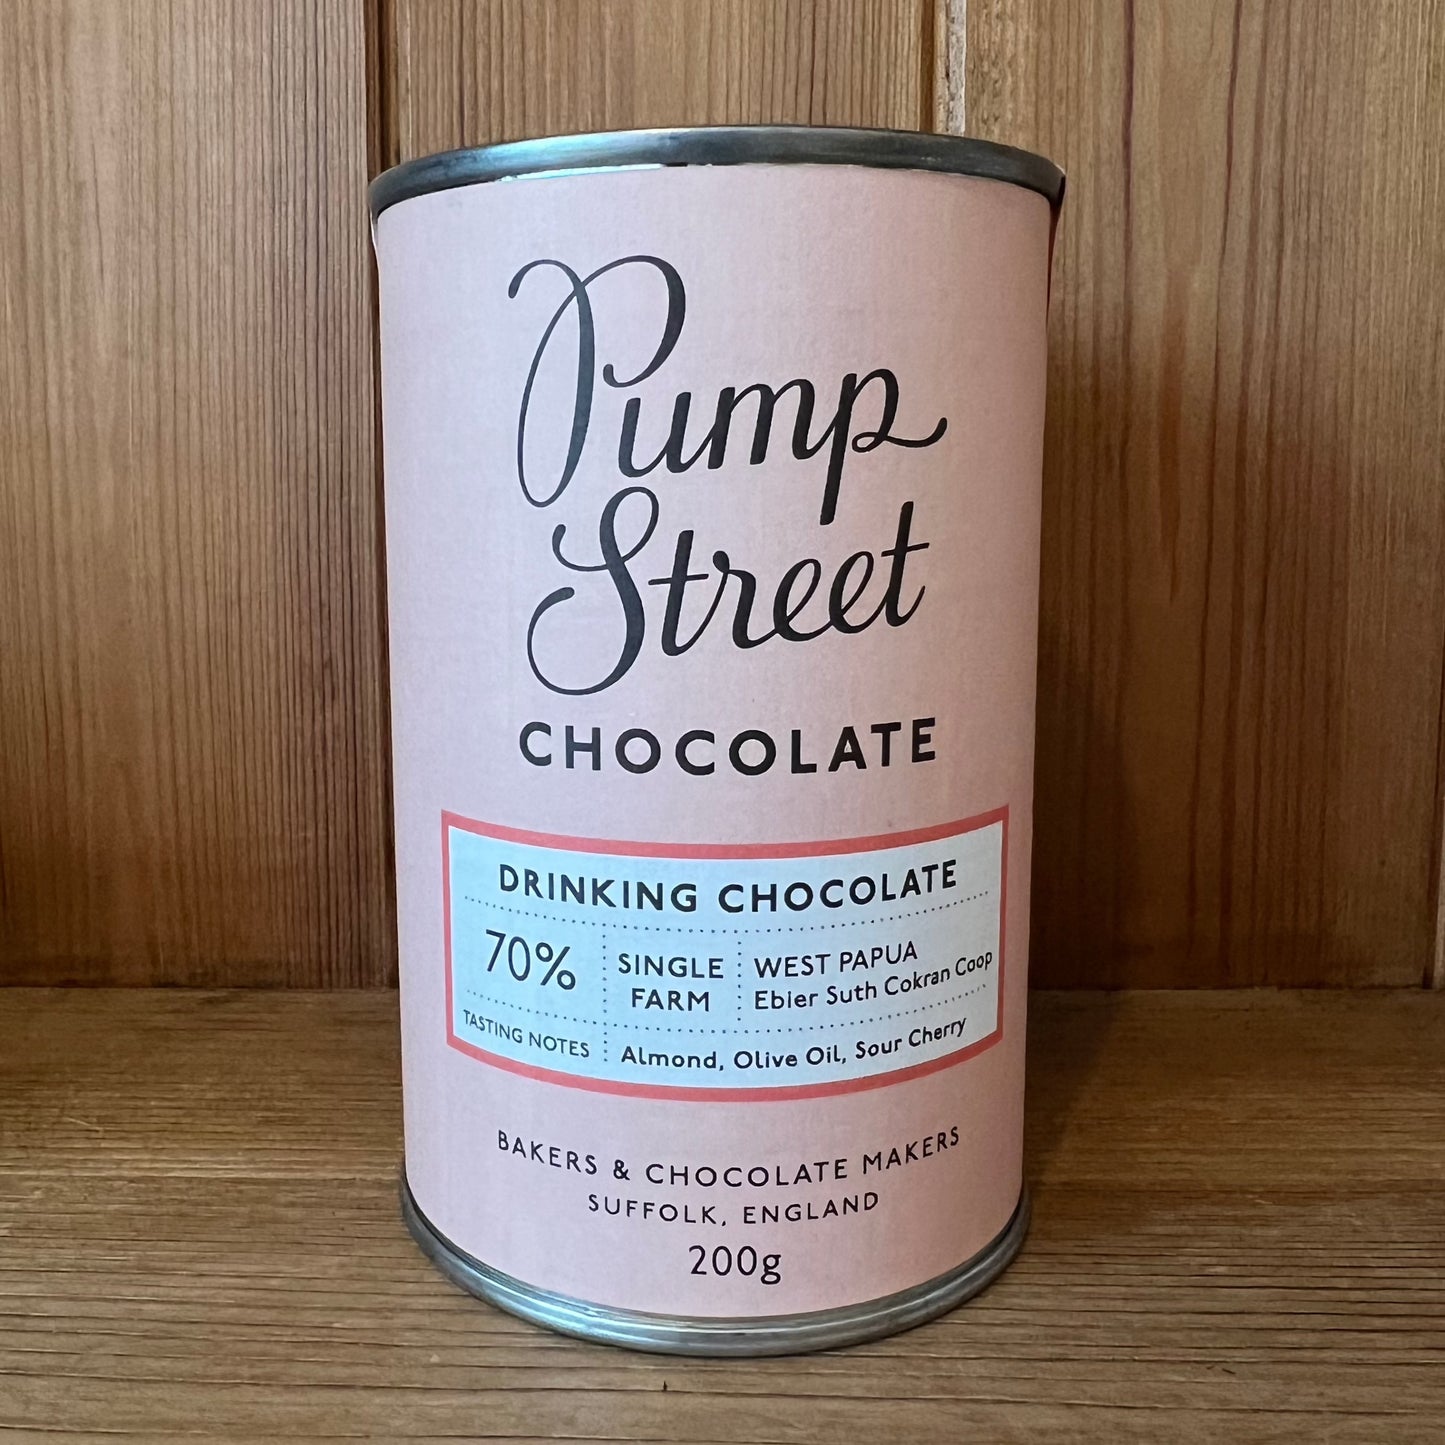 Drinking Chocolate - West Papua 70% By Pump Street Chocolate